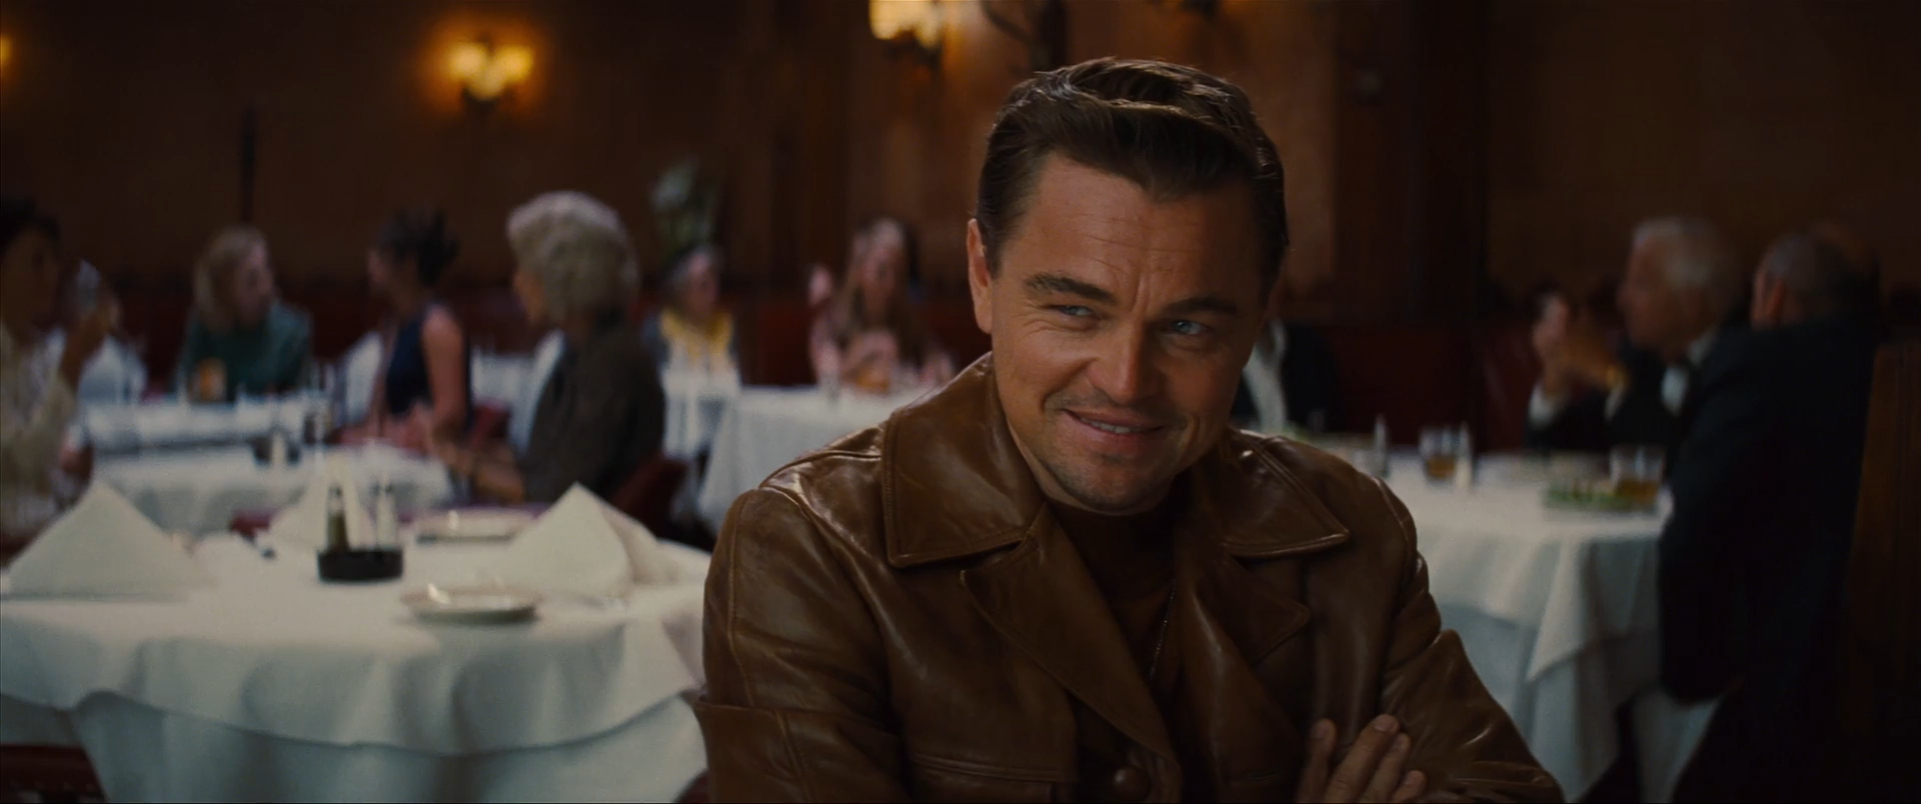 Leonardo DiCaprio as Rick Dalton in "Once Upon a Time in Hollywood"